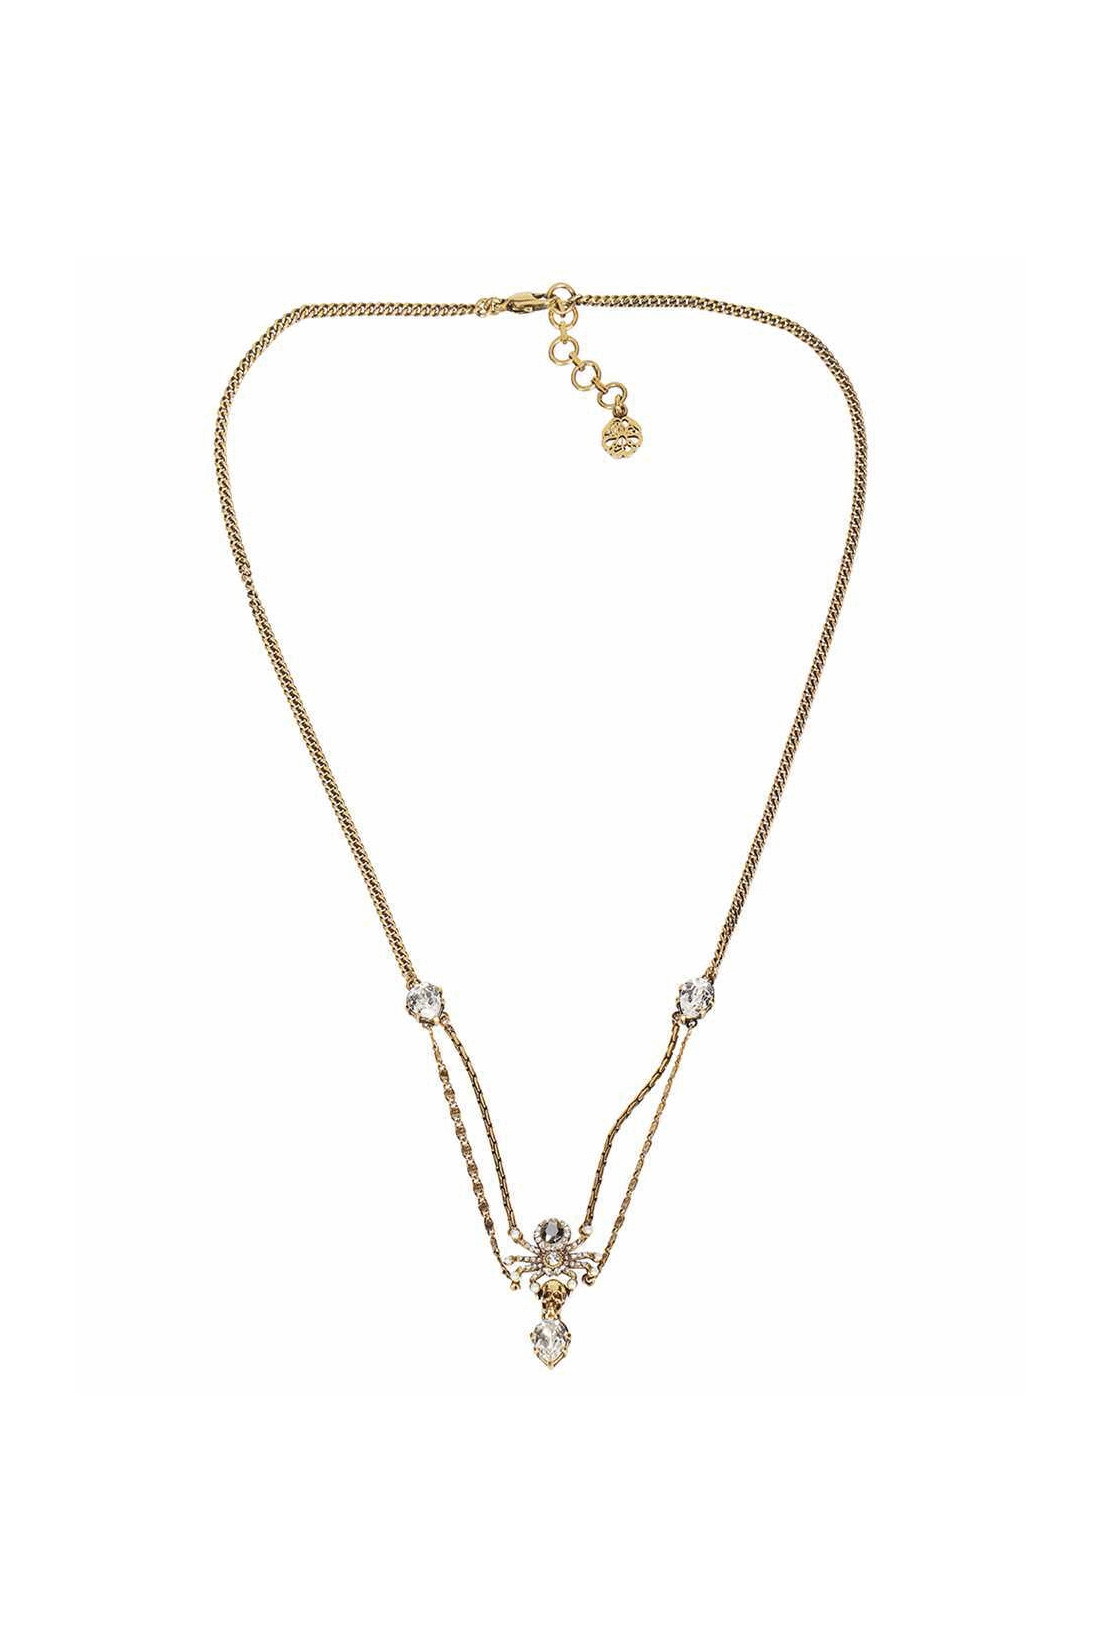 Chain necklace with Skull detail